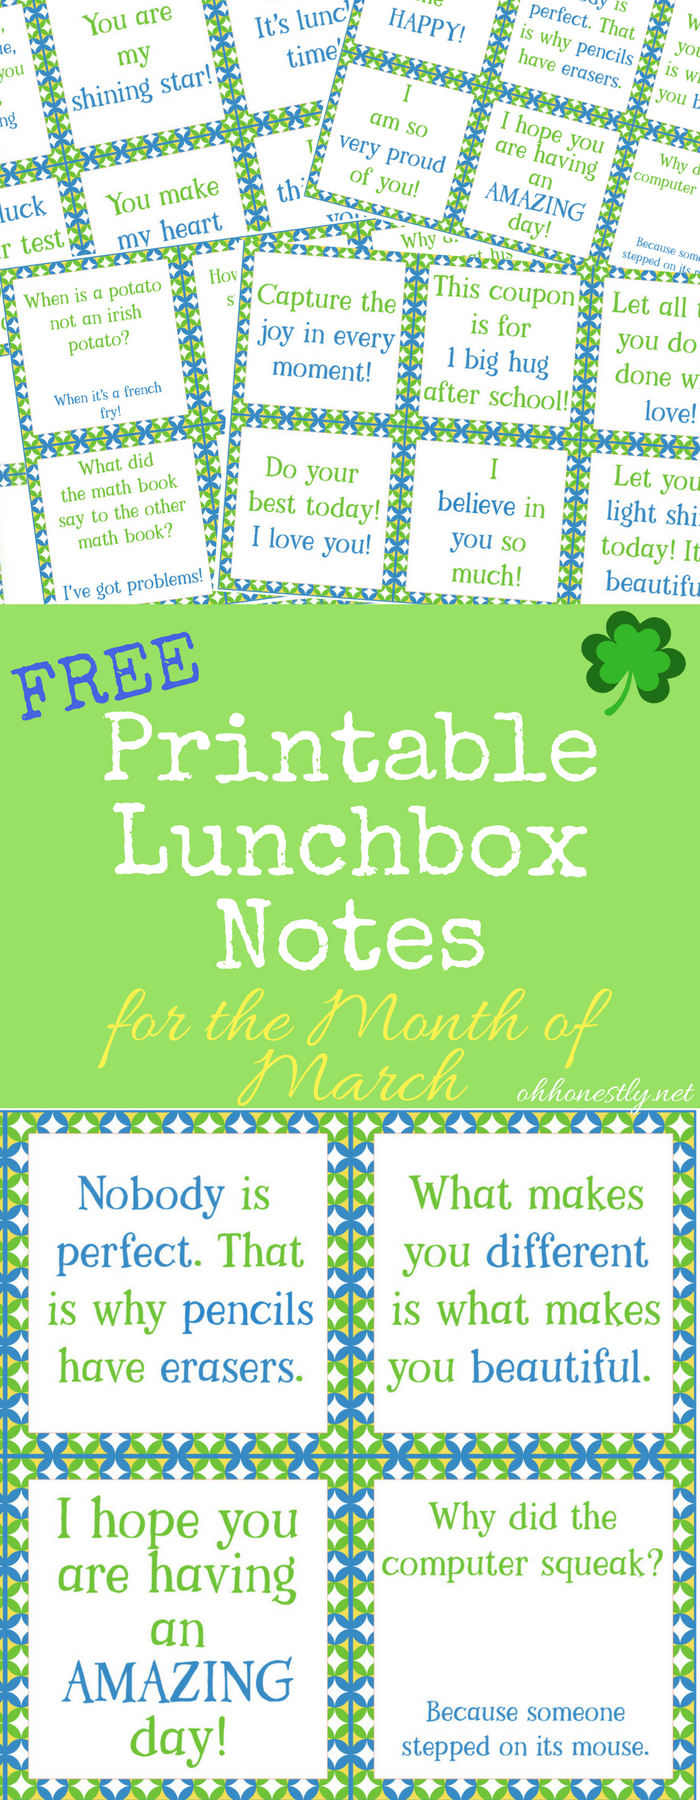 Give your kids a midday pick-me-up with these fun, encouraging, and free printable lunchbox notes. They're perfect for the month of March, with a few you'll love for St. Patrick's Day!